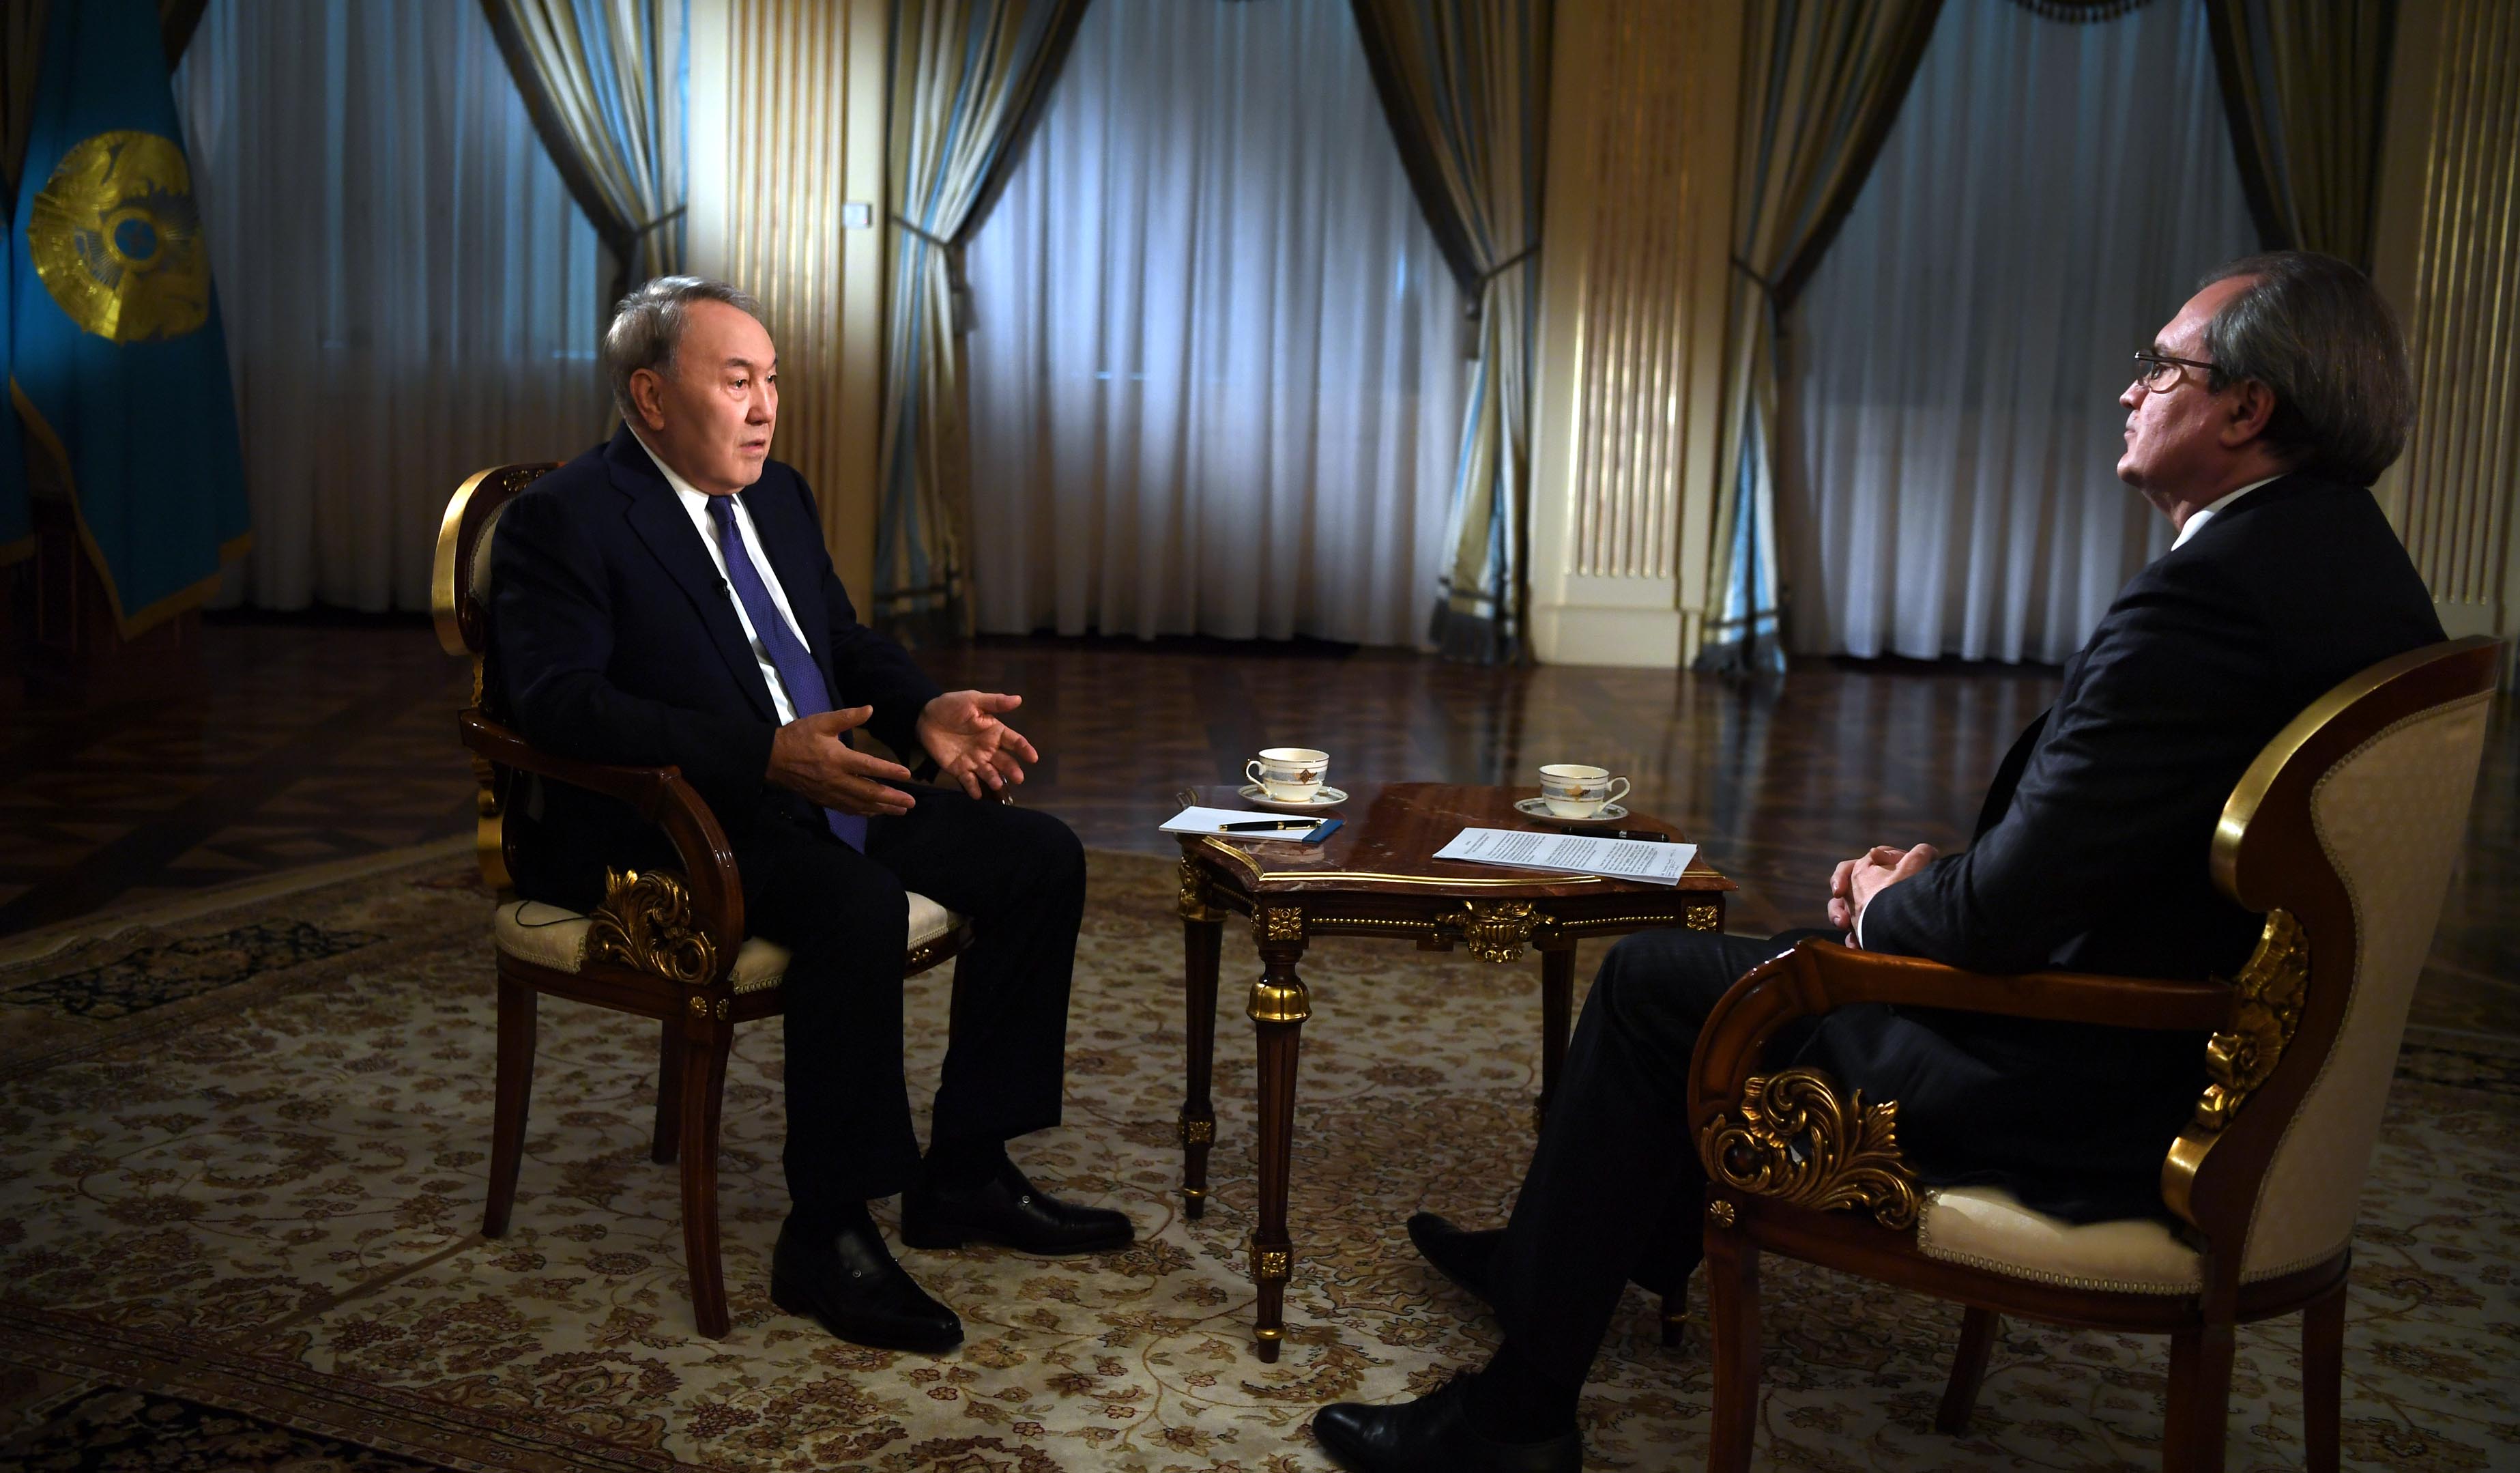 Kazakh President gave an interview to Russian TV channel